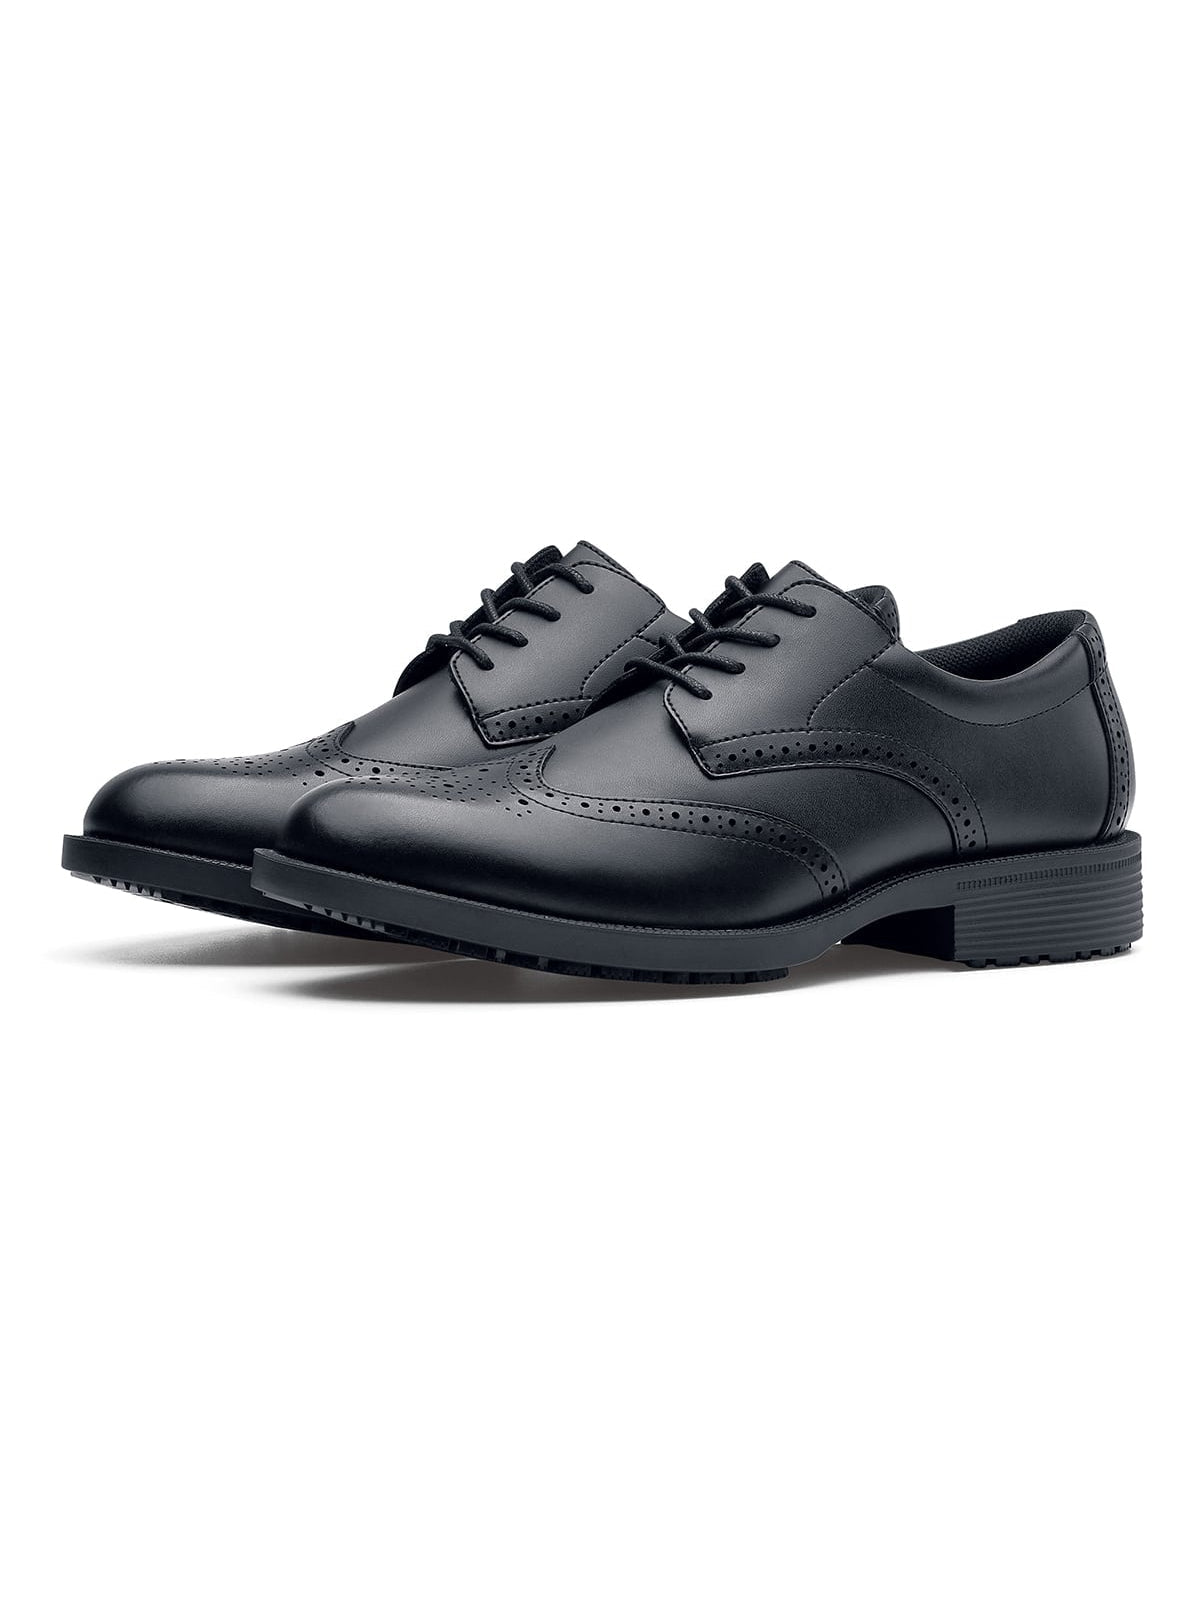 Men's Work Shoe Executive Wing Tip by Shoes For Crews -  ChefsCotton